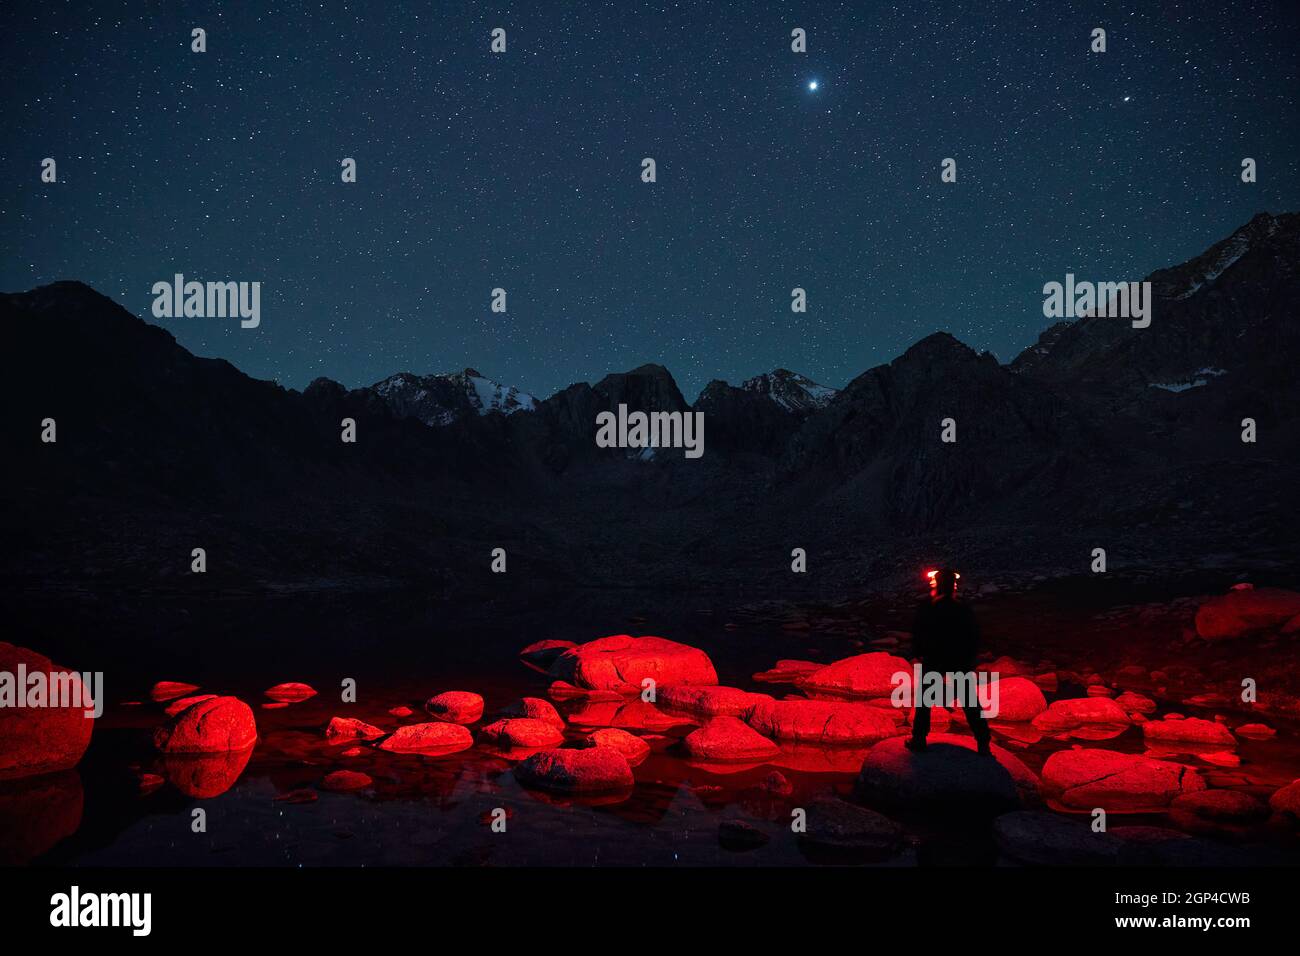 Tourist man in silhouette with red light of headlamp near lake in the mountains under night sky with stars. Stock Photo